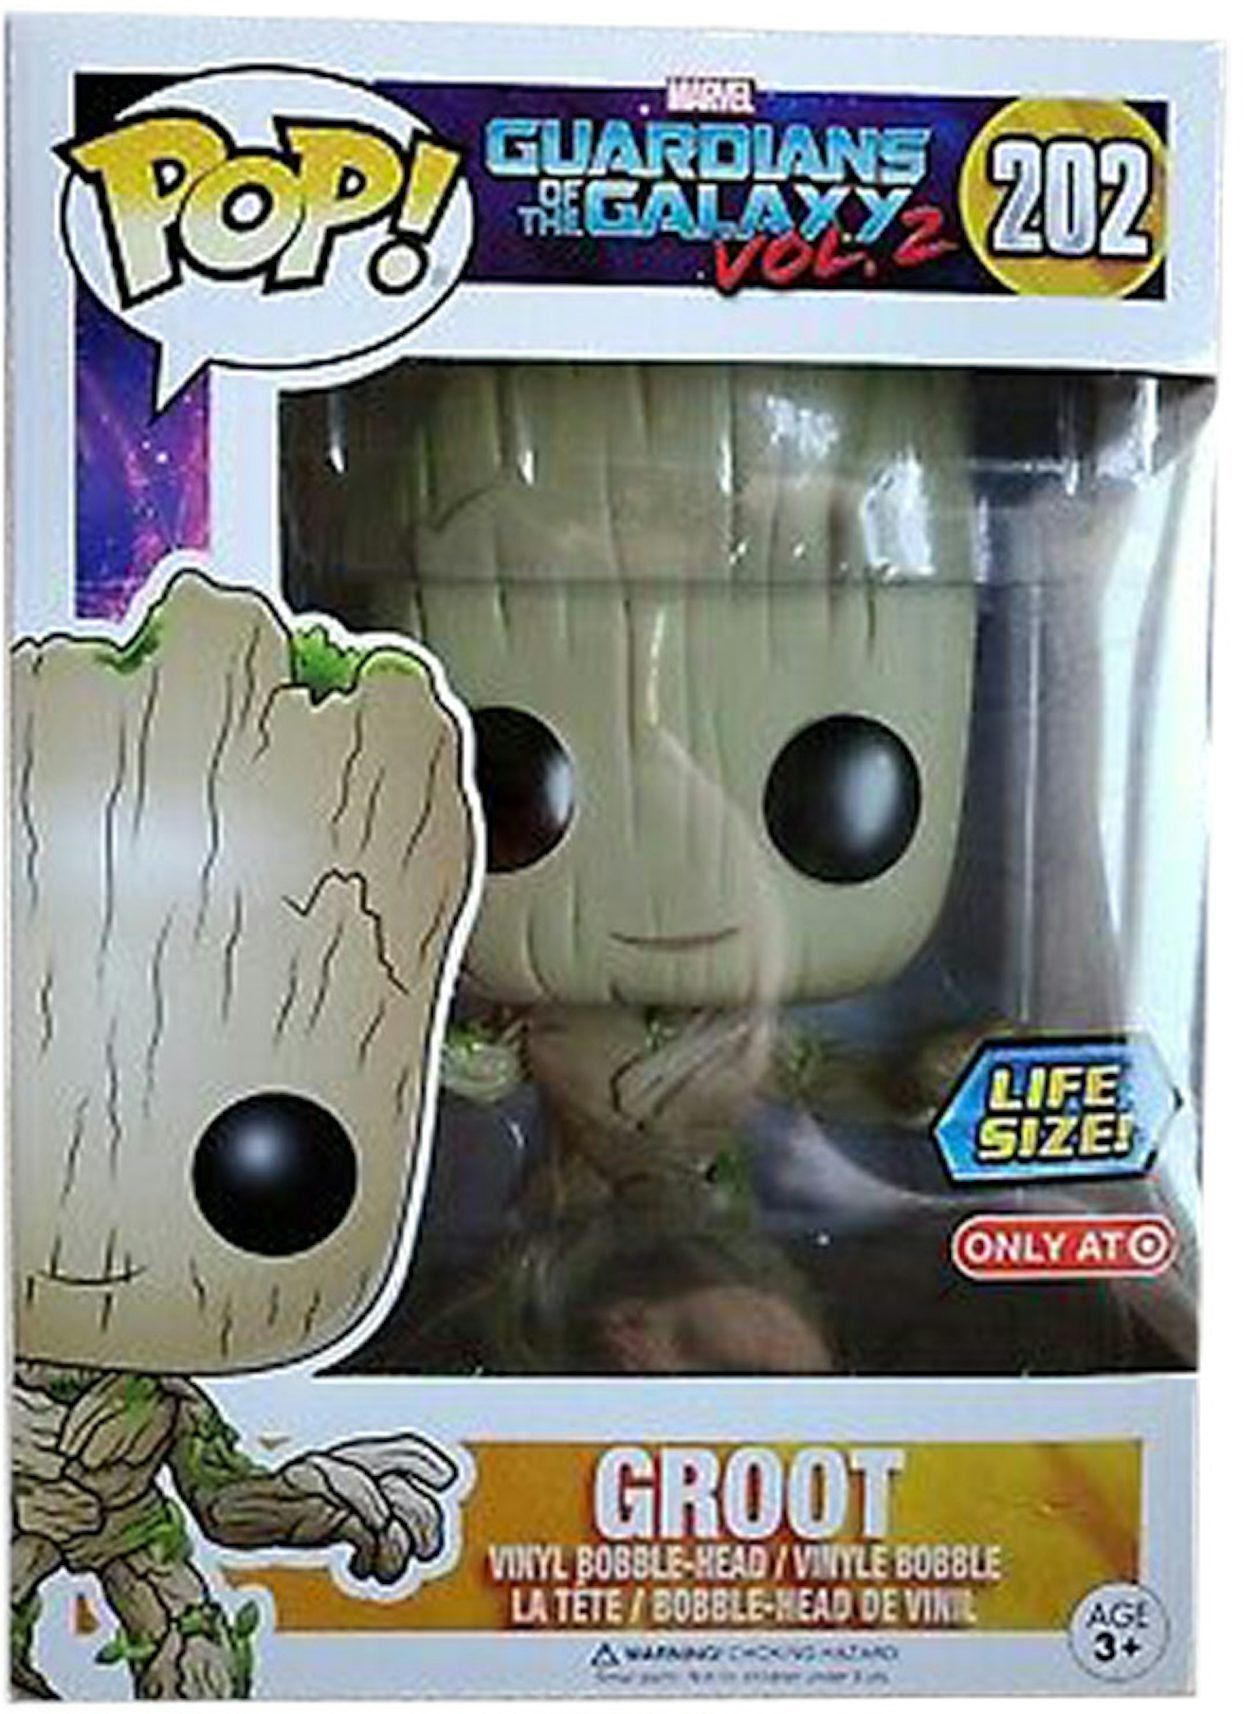  Star-Lord with Groot Exclusive Vinyl Figure : Toys & Games